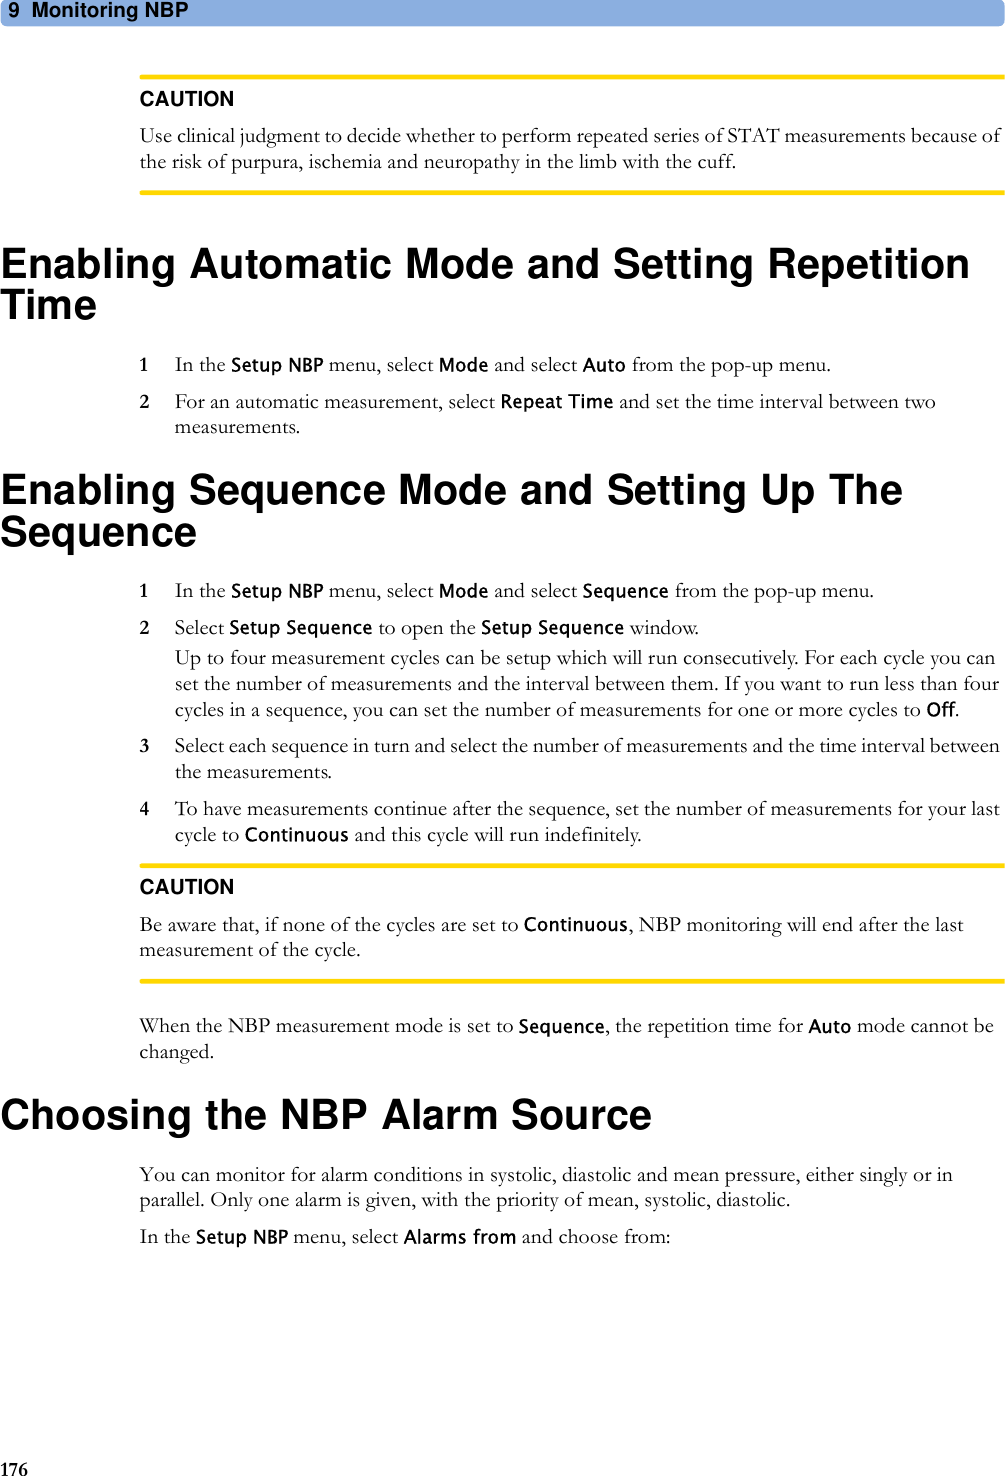 9 Monitoring NBP176CAUTIONUse clinical judgment to decide whether to perform repeated series of STAT measurements because of the risk of purpura, ischemia and neuropathy in the limb with the cuff.Enabling Automatic Mode and Setting Repetition Time1In the Setup NBP menu, select Mode and select Auto from the pop-up menu.2For an automatic measurement, select Repeat Time and set the time interval between two measurements.Enabling Sequence Mode and Setting Up The Sequence1In the Setup NBP menu, select Mode and select Sequence from the pop-up menu.2Select Setup Sequence to open the Setup Sequence window.Up to four measurement cycles can be setup which will run consecutively. For each cycle you can set the number of measurements and the interval between them. If you want to run less than four cycles in a sequence, you can set the number of measurements for one or more cycles to Off.3Select each sequence in turn and select the number of measurements and the time interval between the measurements.4To have measurements continue after the sequence, set the number of measurements for your last cycle to Continuous and this cycle will run indefinitely.CAUTIONBe aware that, if none of the cycles are set to Continuous, NBP monitoring will end after the last measurement of the cycle.When the NBP measurement mode is set to Sequence, the repetition time for Auto mode cannot be changed.Choosing the NBP Alarm SourceYou can monitor for alarm conditions in systolic, diastolic and mean pressure, either singly or in parallel. Only one alarm is given, with the priority of mean, systolic, diastolic.In the Setup NBP menu, select Alarms from and choose from: